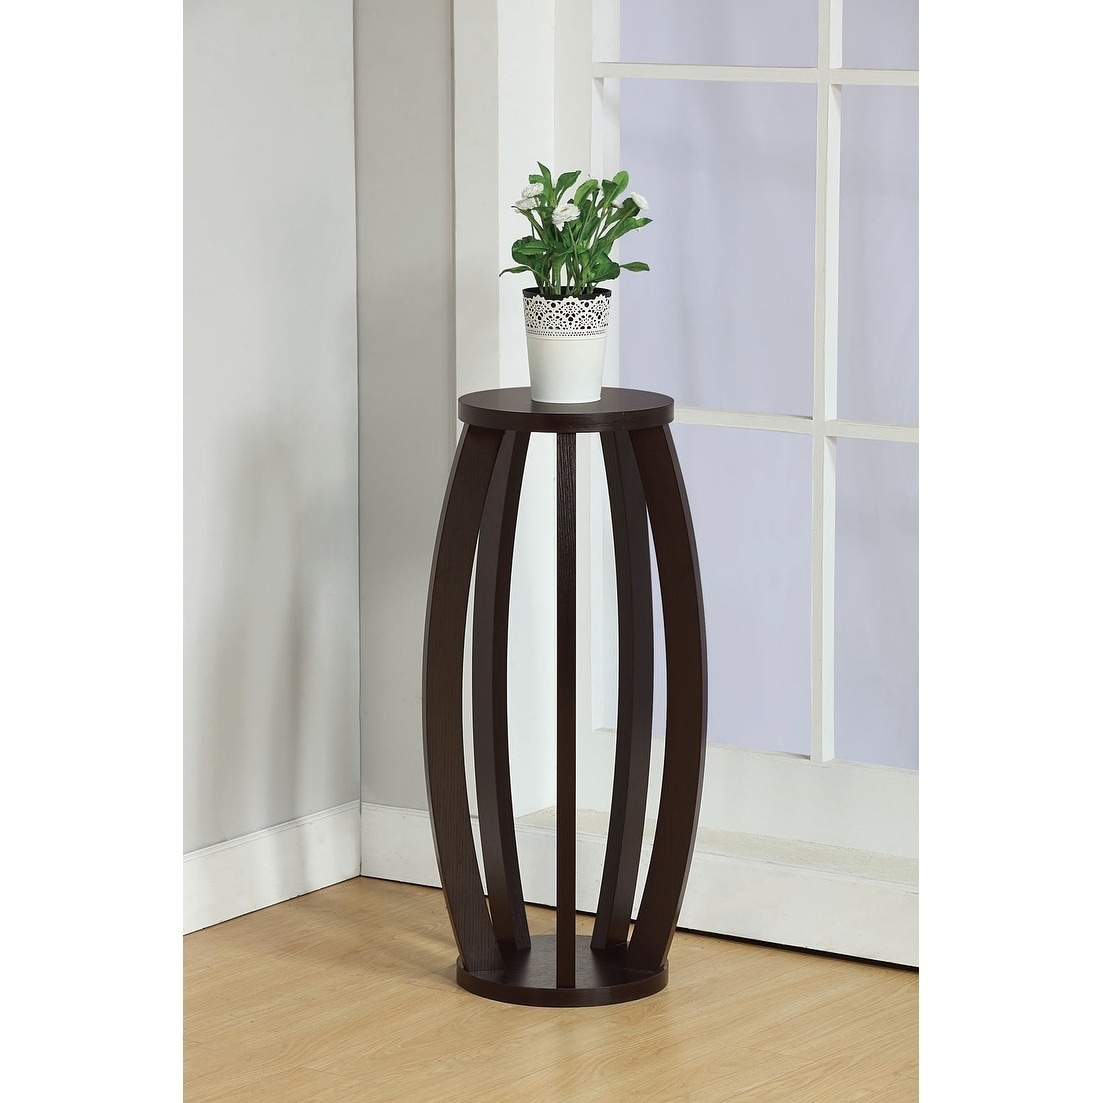 SINTECHNO Contemporary Stand Barrel Inspired Plant Stand